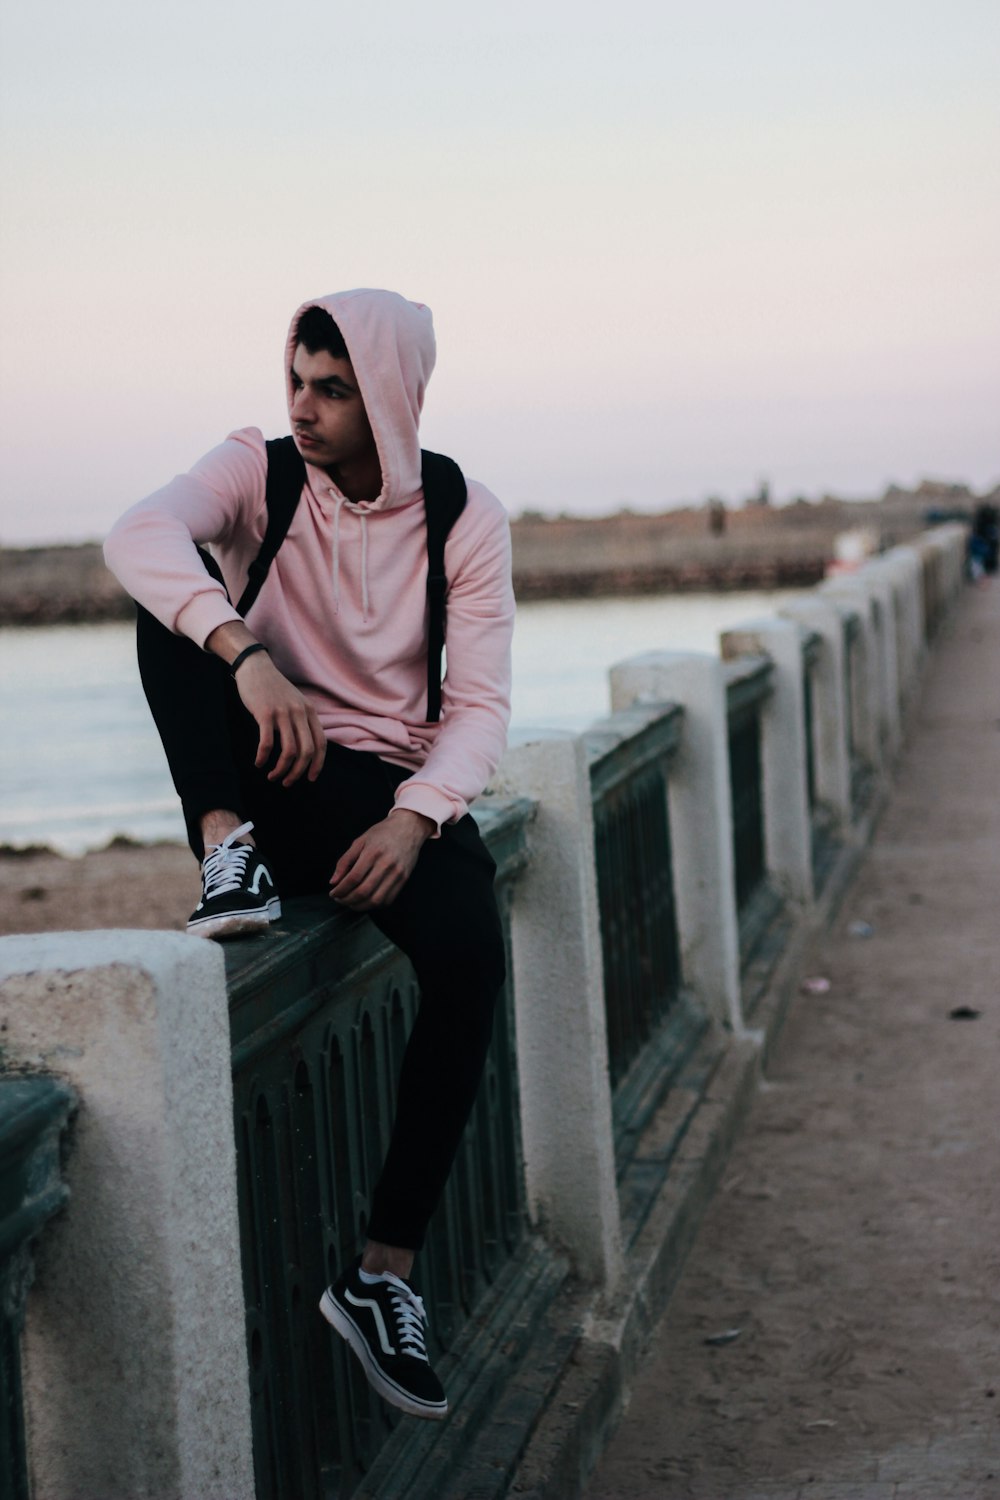 Man in brown hoodie sitting on concrete bench photo – Free Vans shoes Image  on Unsplash